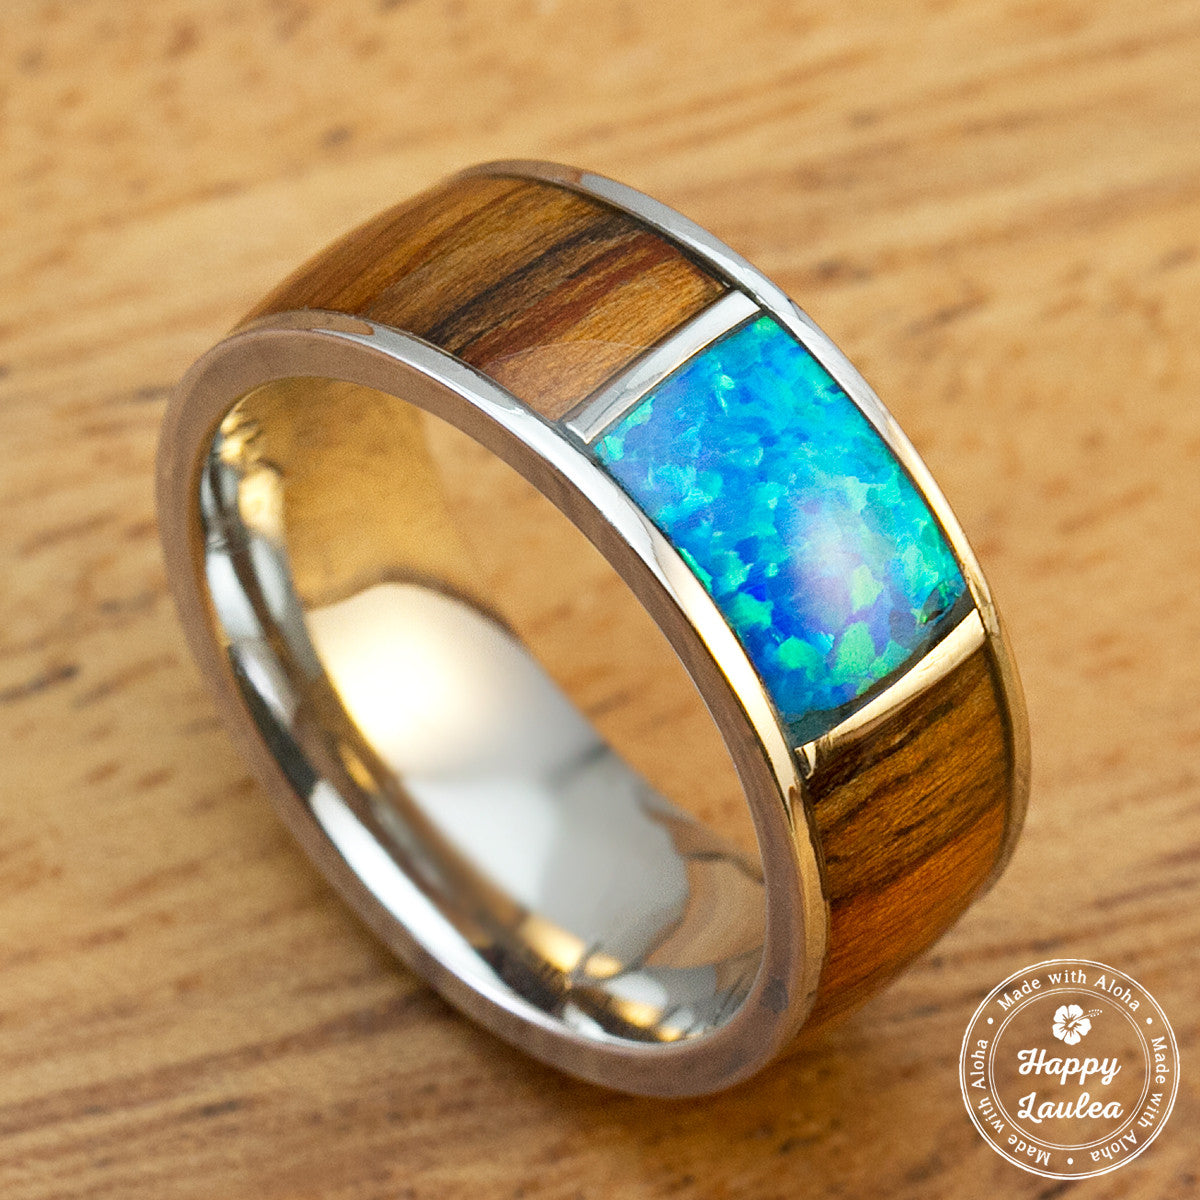 Stainless Steel Ring with Koa Wood & Center Opal Inlay - 8mm, Dome Shape, Comfort Fitment